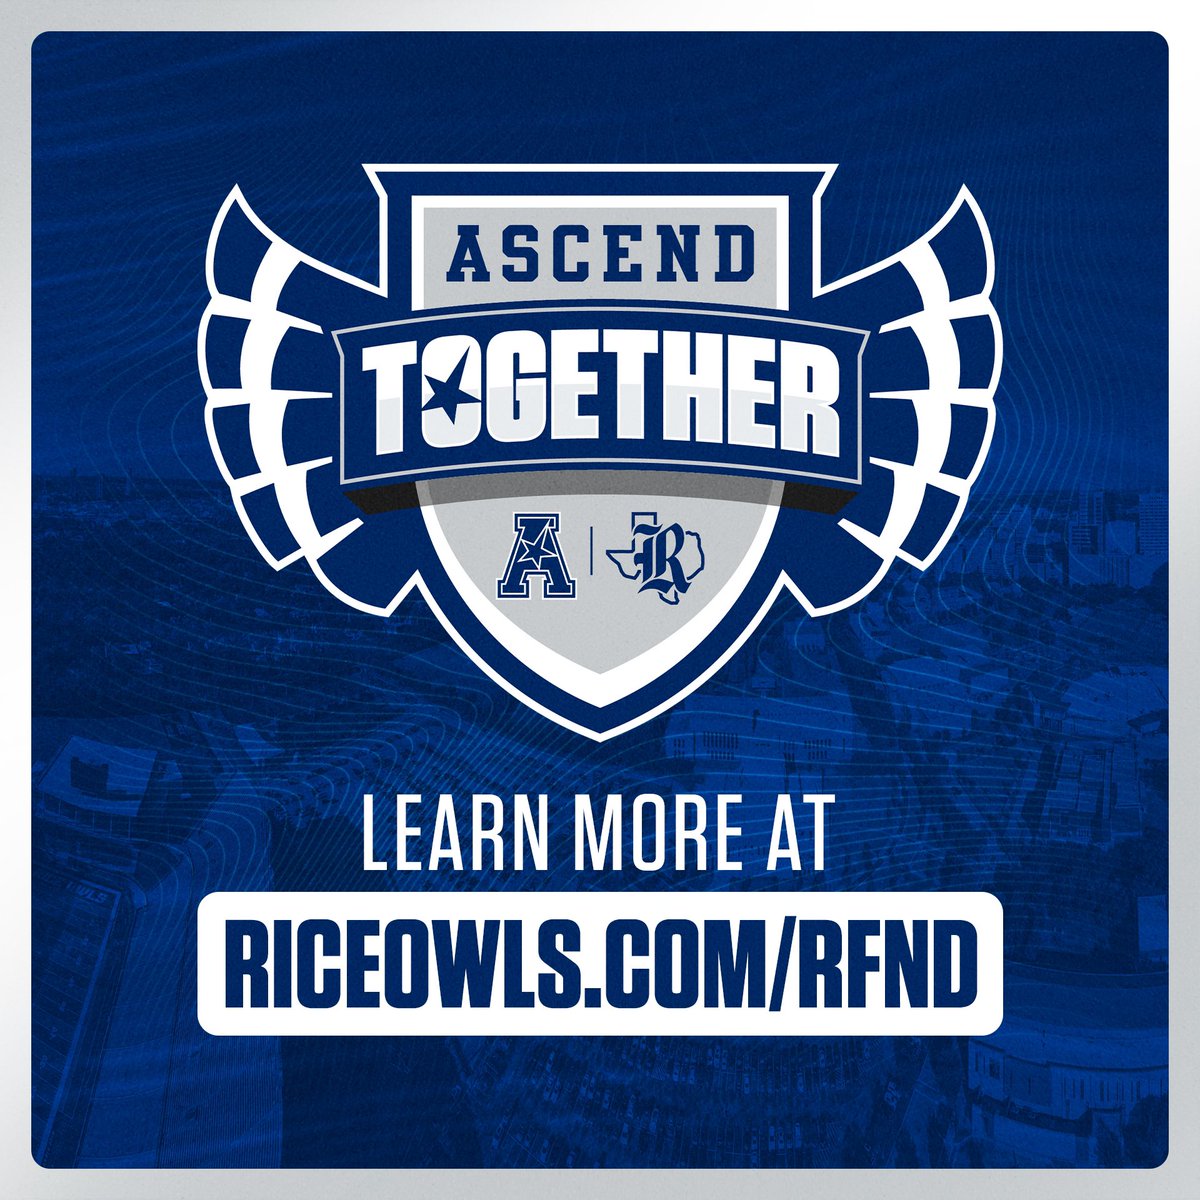 Monumental day for @RiceAthletics as we Ascend Together into the @American_Conf! Join the journey at RiceOwls.com/RFND